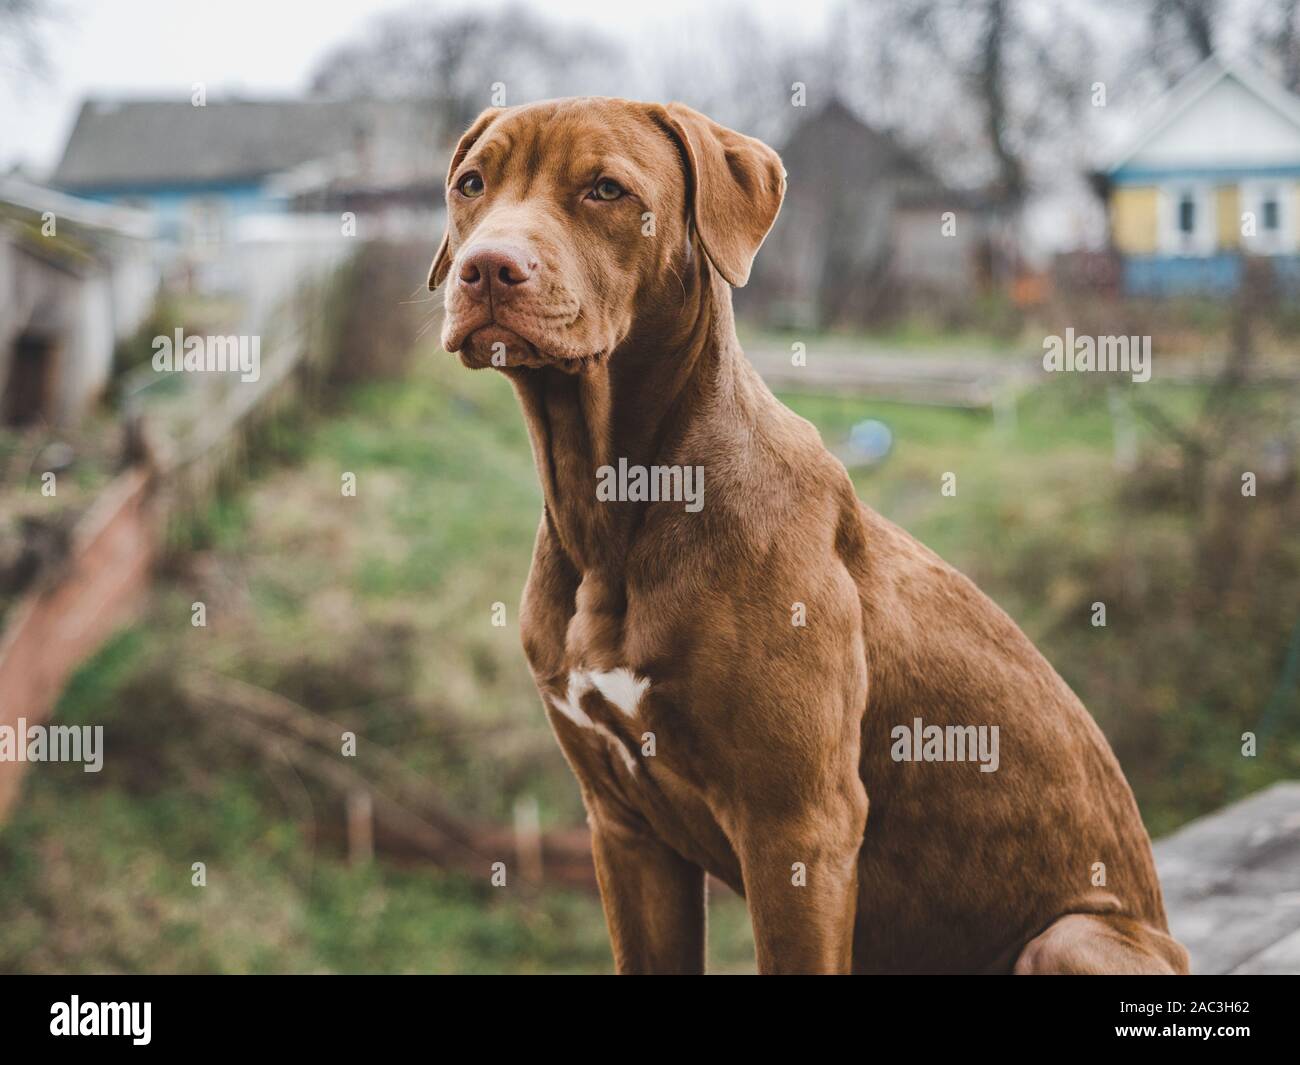 Charming puppy of chocolate color. Close-up, outdoors Stock Photo